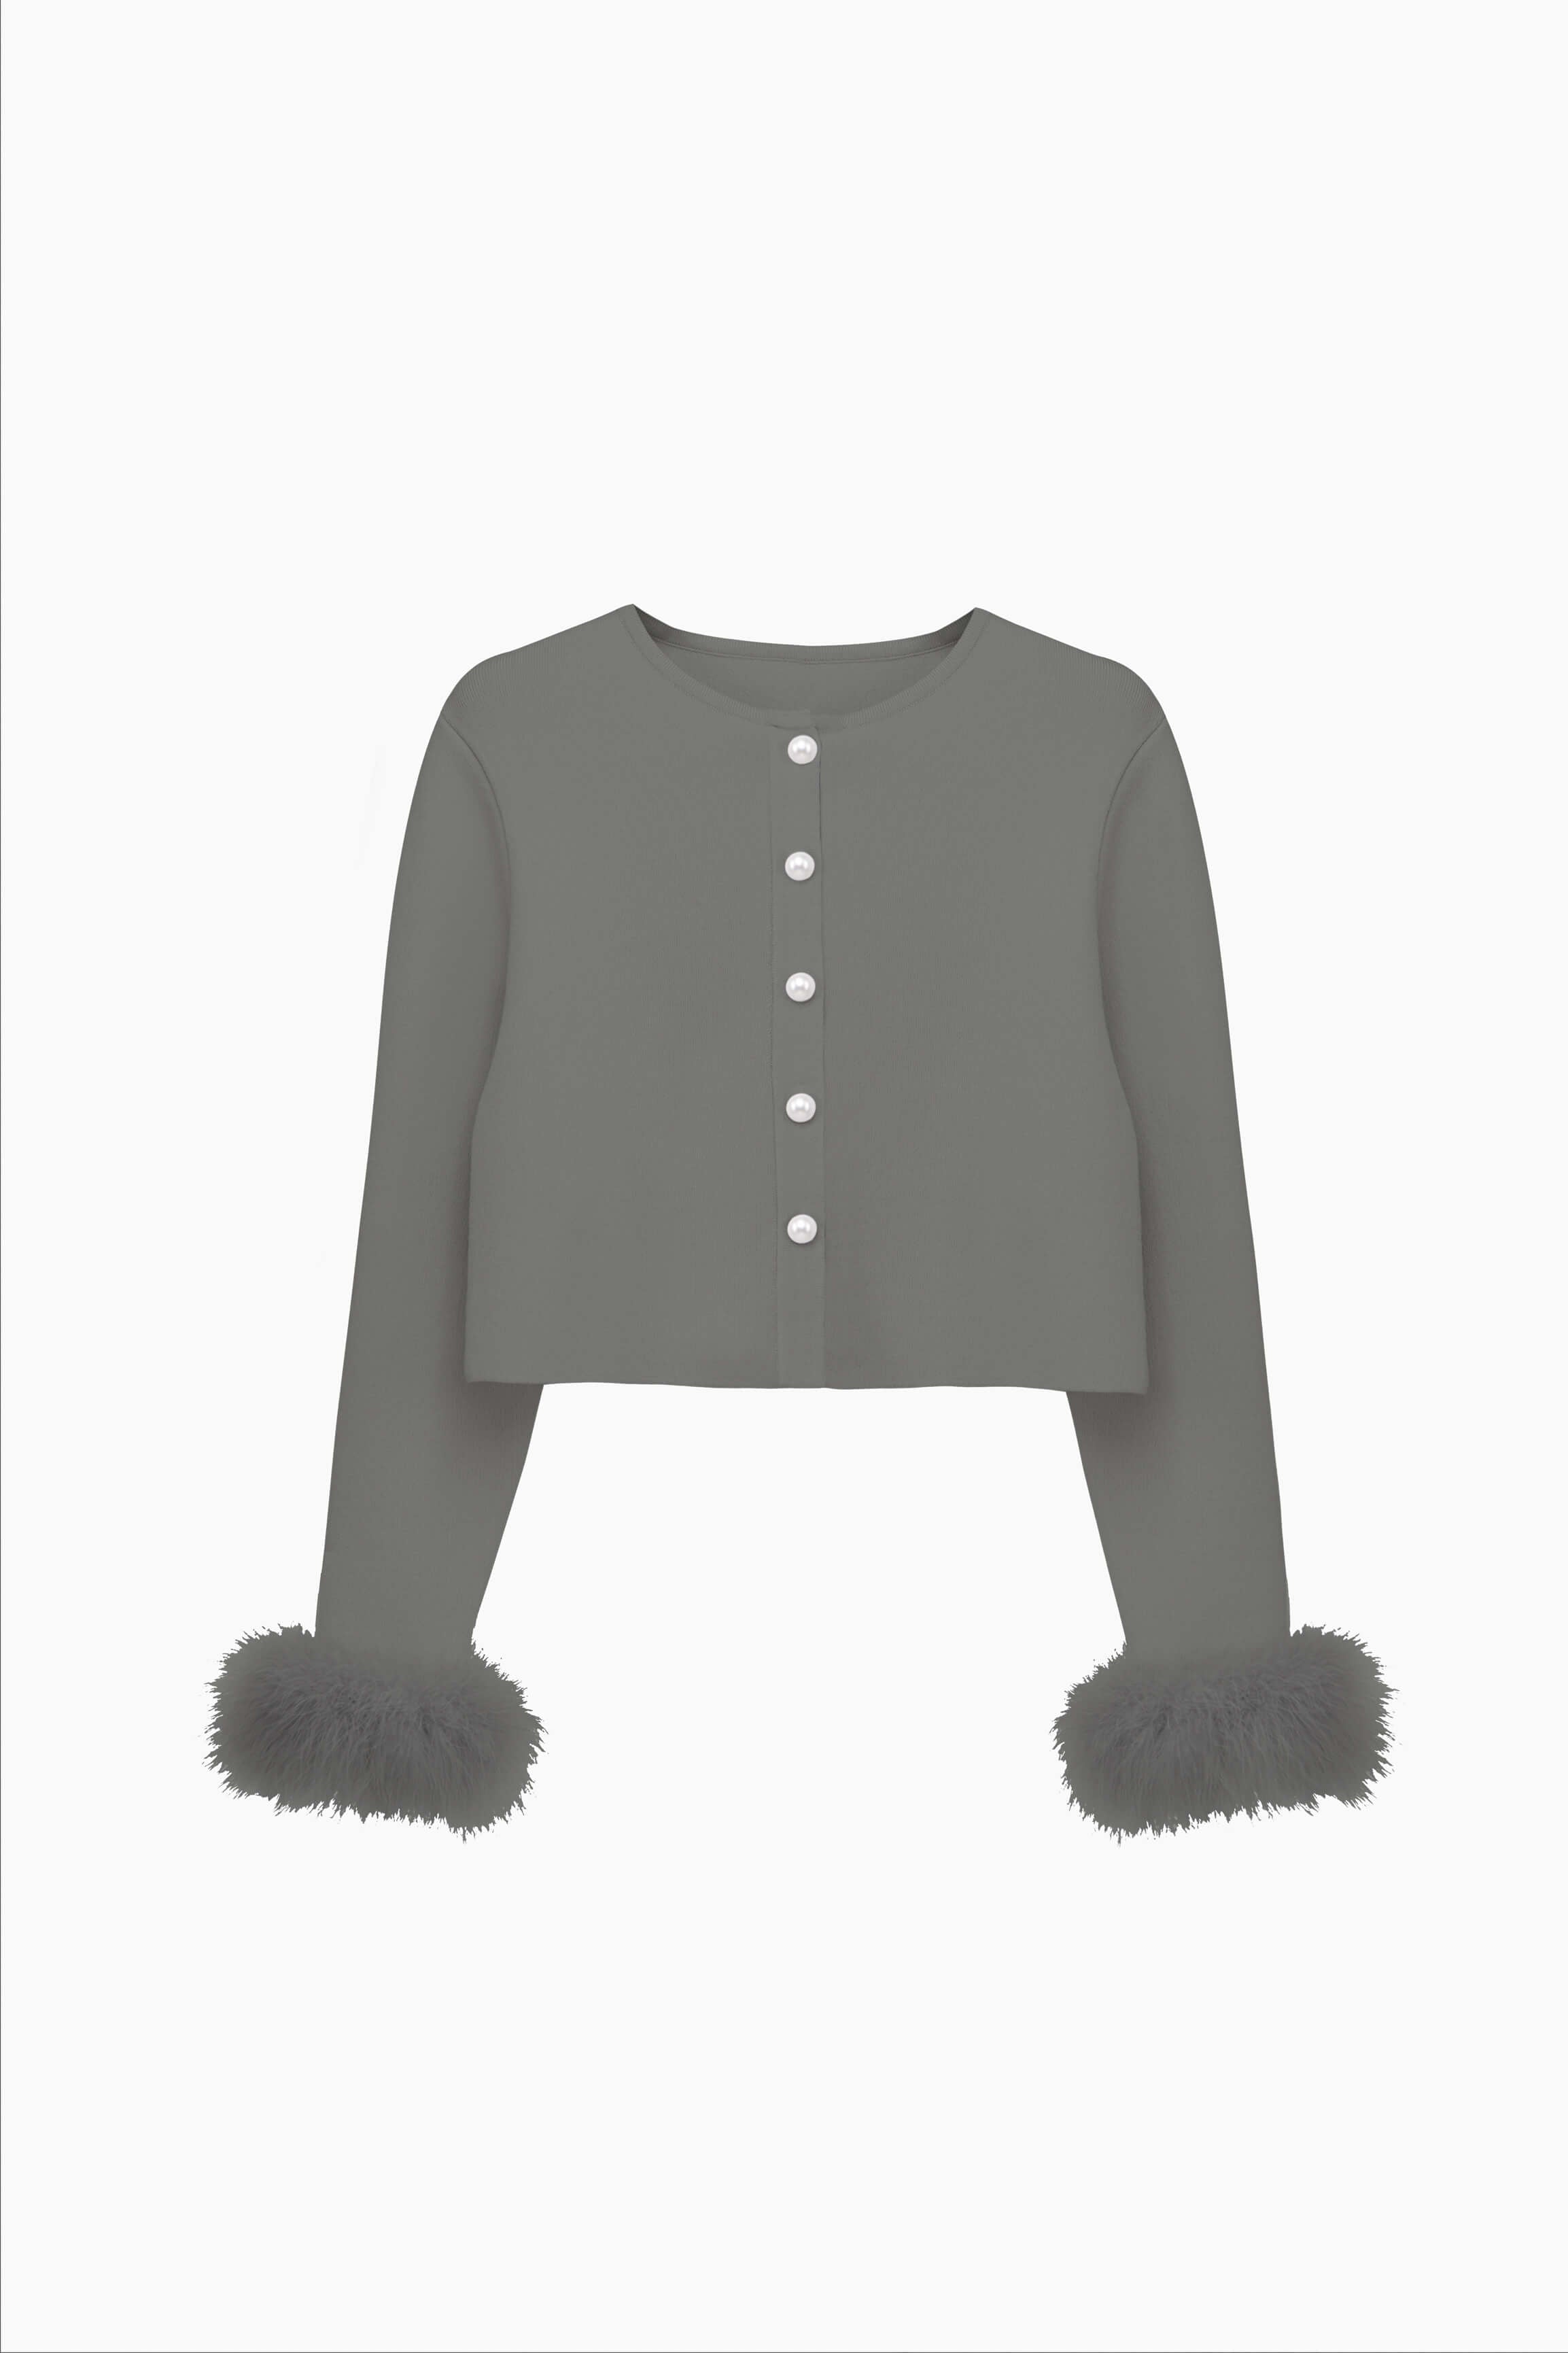 Gray cardigan | Cropped women's knitted cardigan | Sweater with feathers